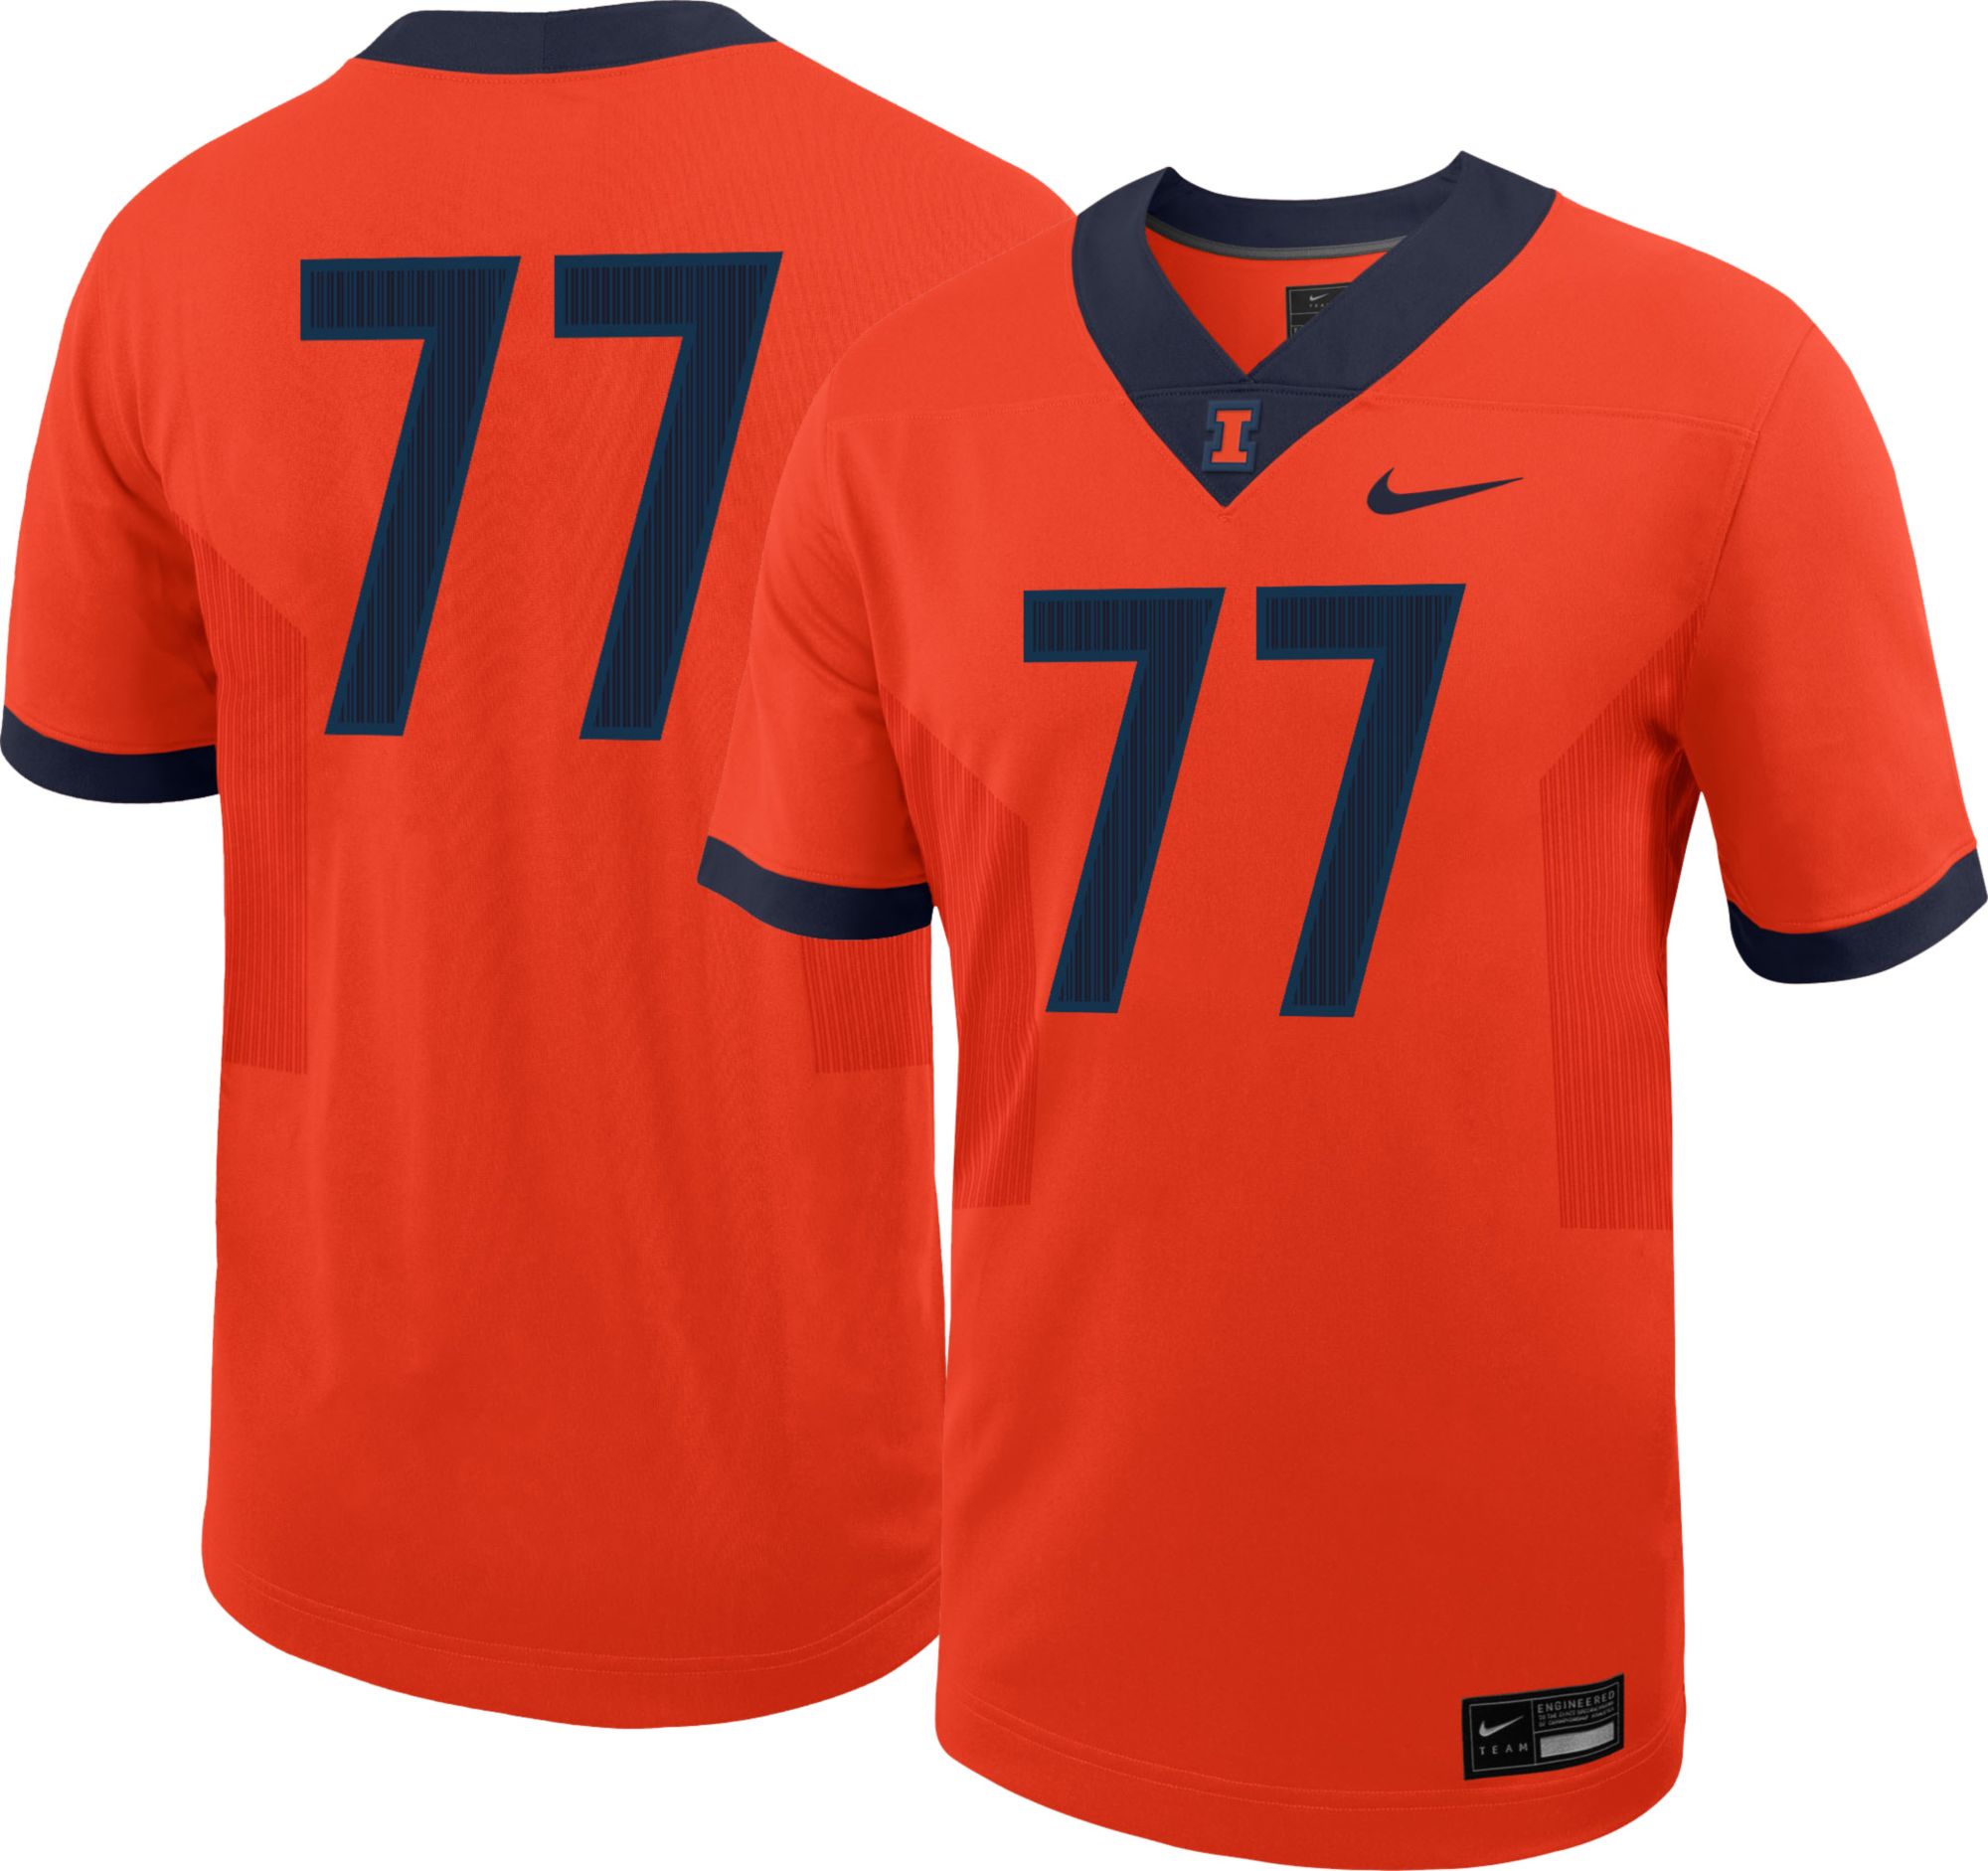 Fighting Illini rugby MVP jersey